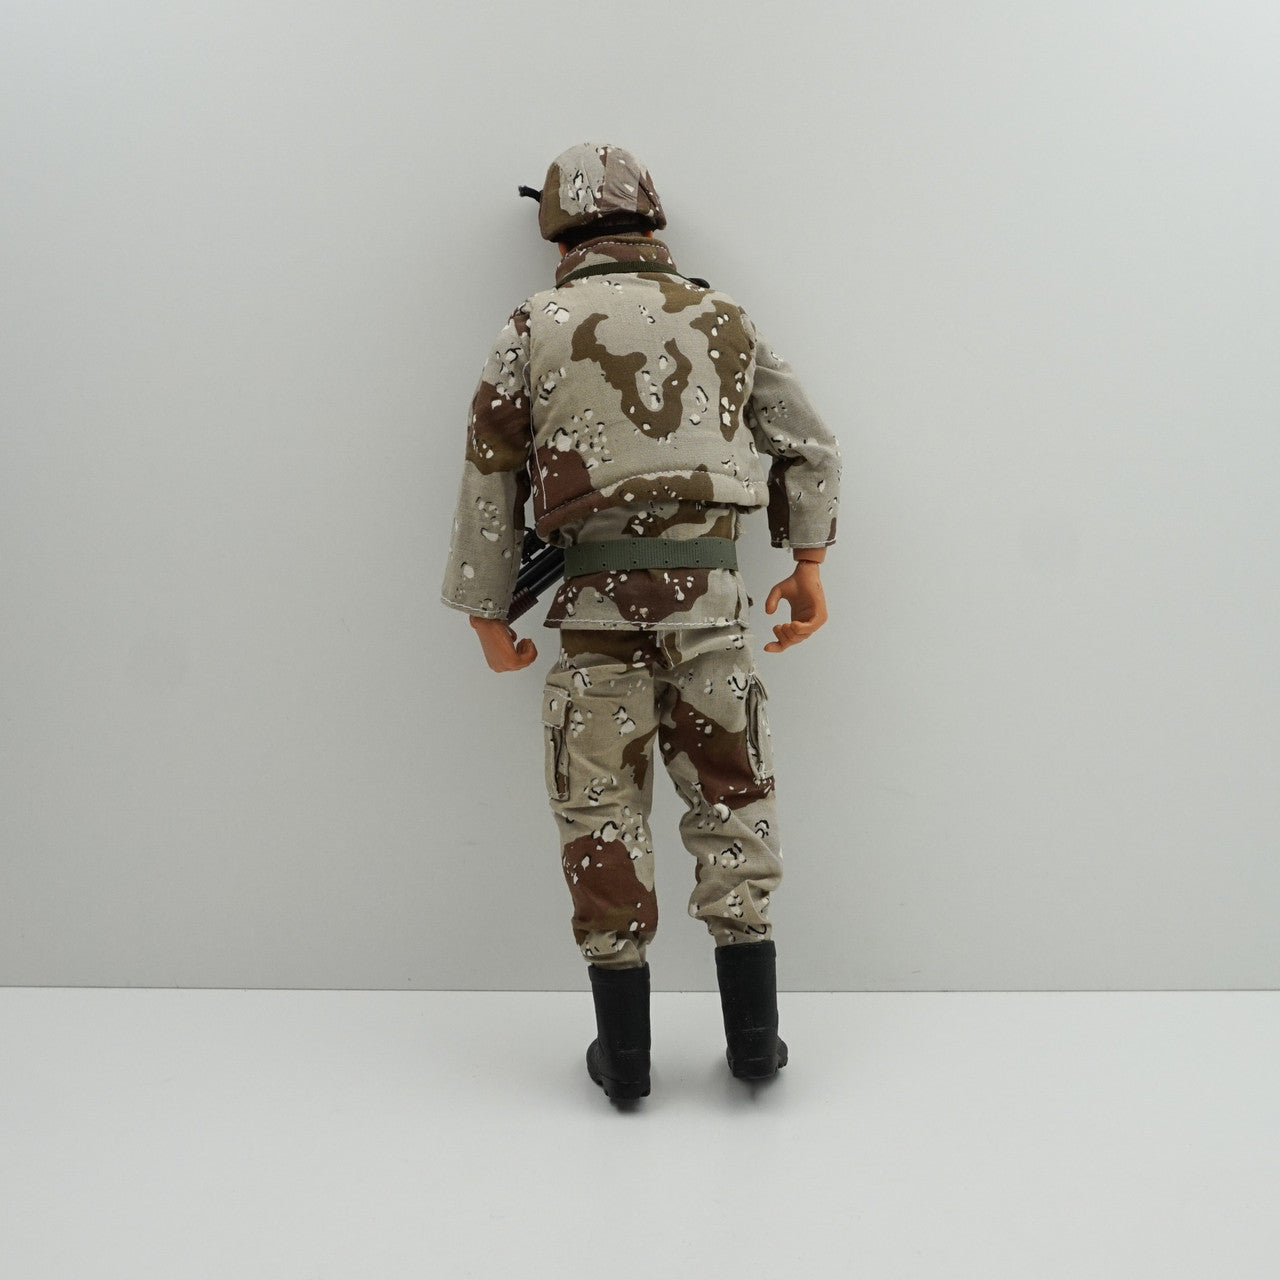 Toy Actionman